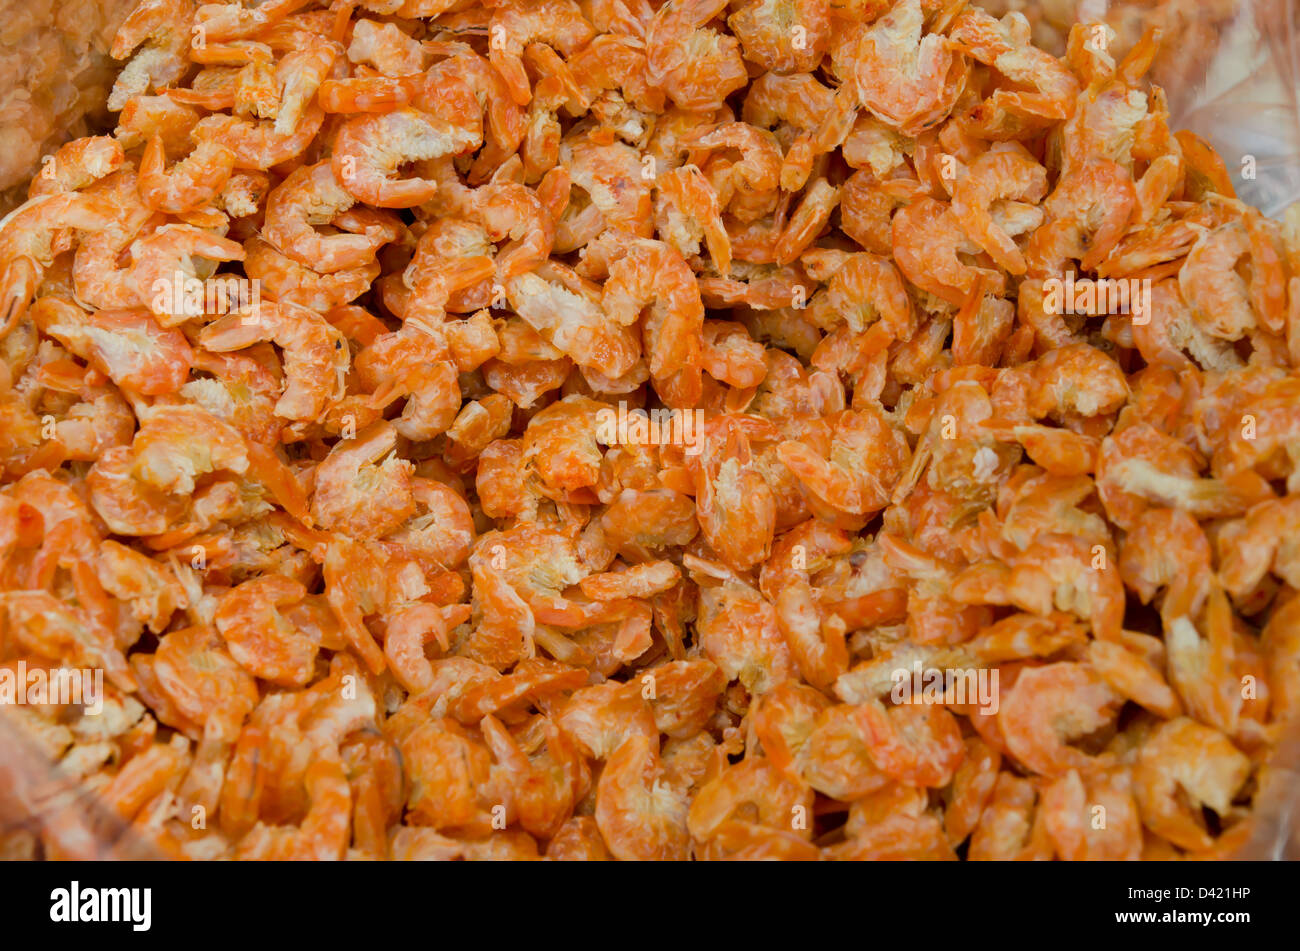 Small dried shrimp in market of Thailand Stock Photo